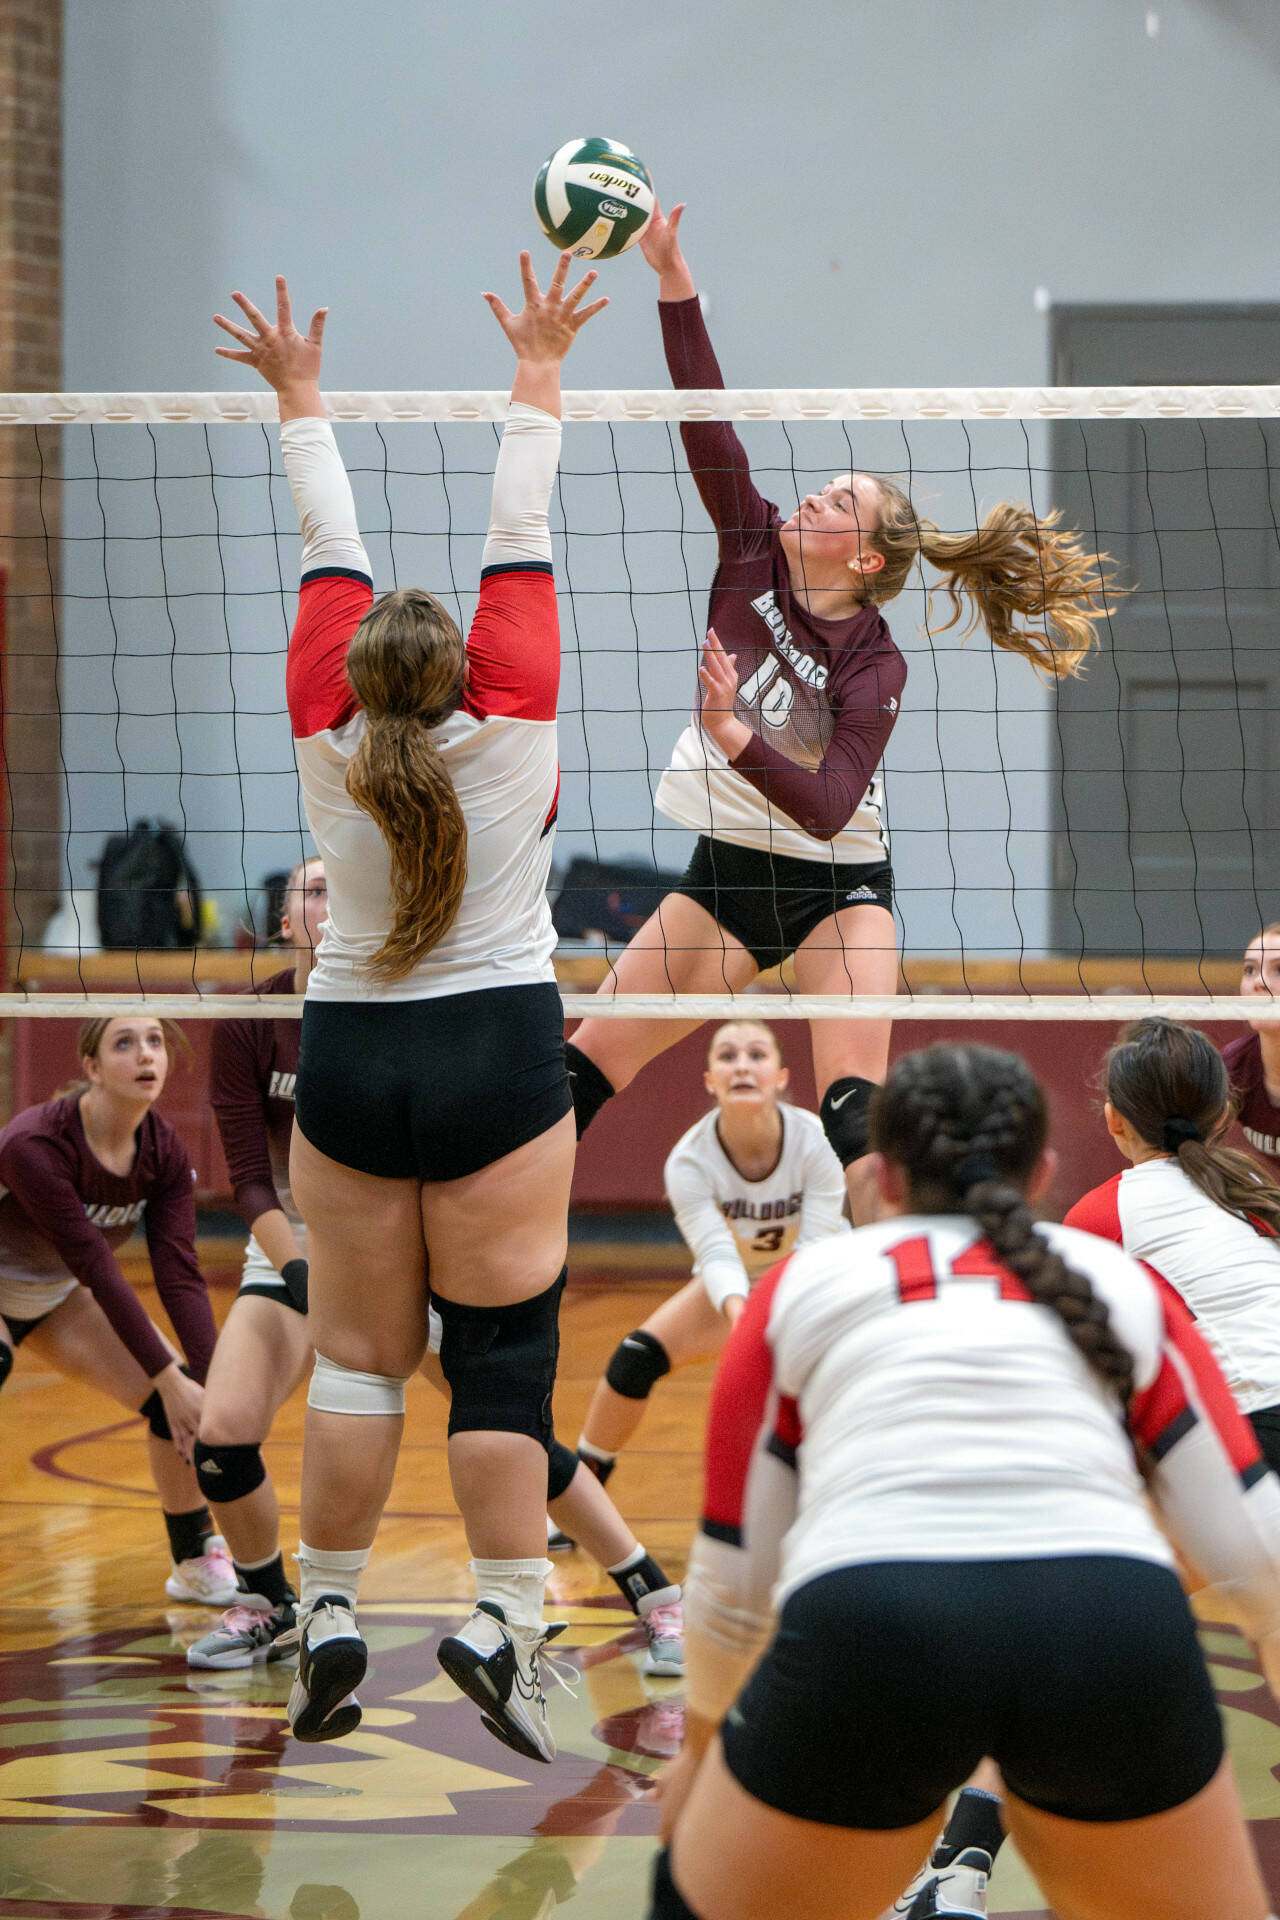 PHOTO BY FOREST WORGUM Montesano outside hitter Kaila Hatton (10) records a kill during a 3-2 win over Castle Rock in the 1A District 4 Tournament on Wednesday in Montesano.